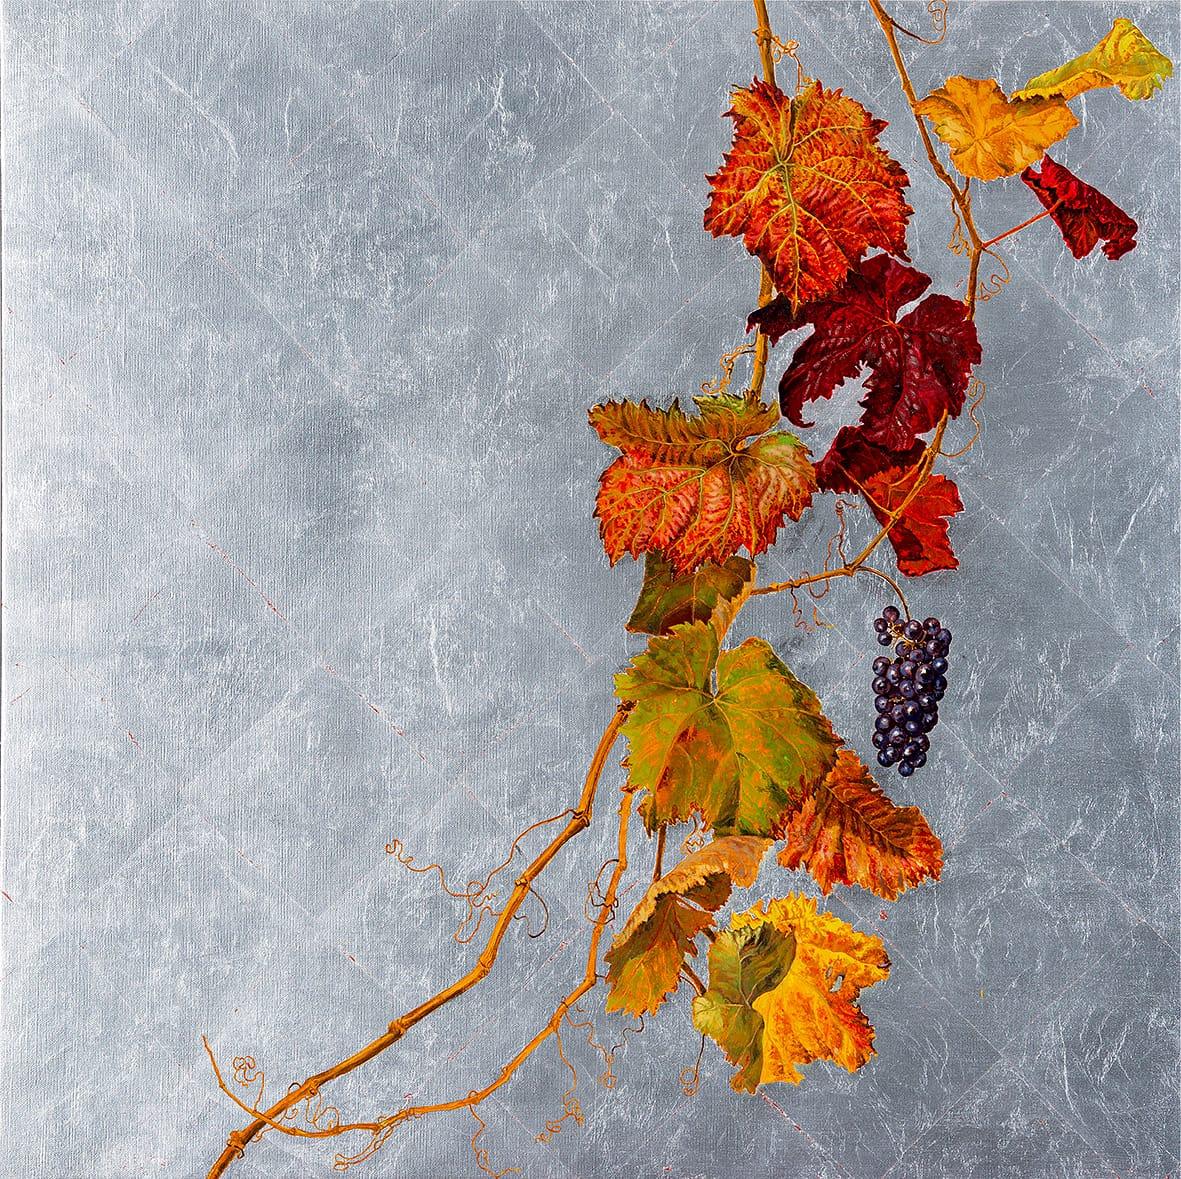 Autumn vine shoot on a silver background